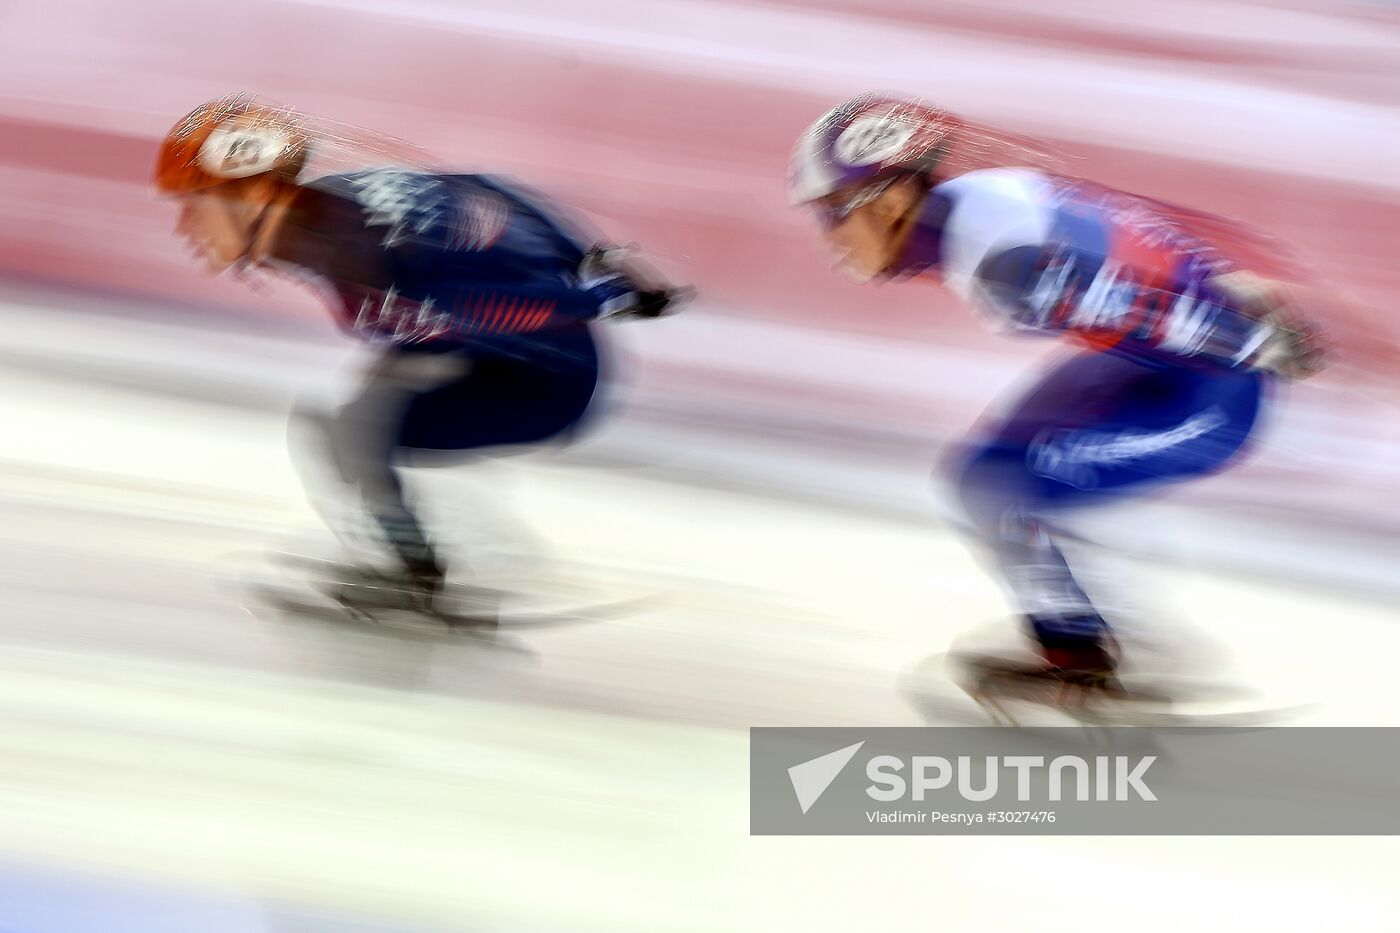 World Cup Short Track Speed Skating Minsk. Day Two